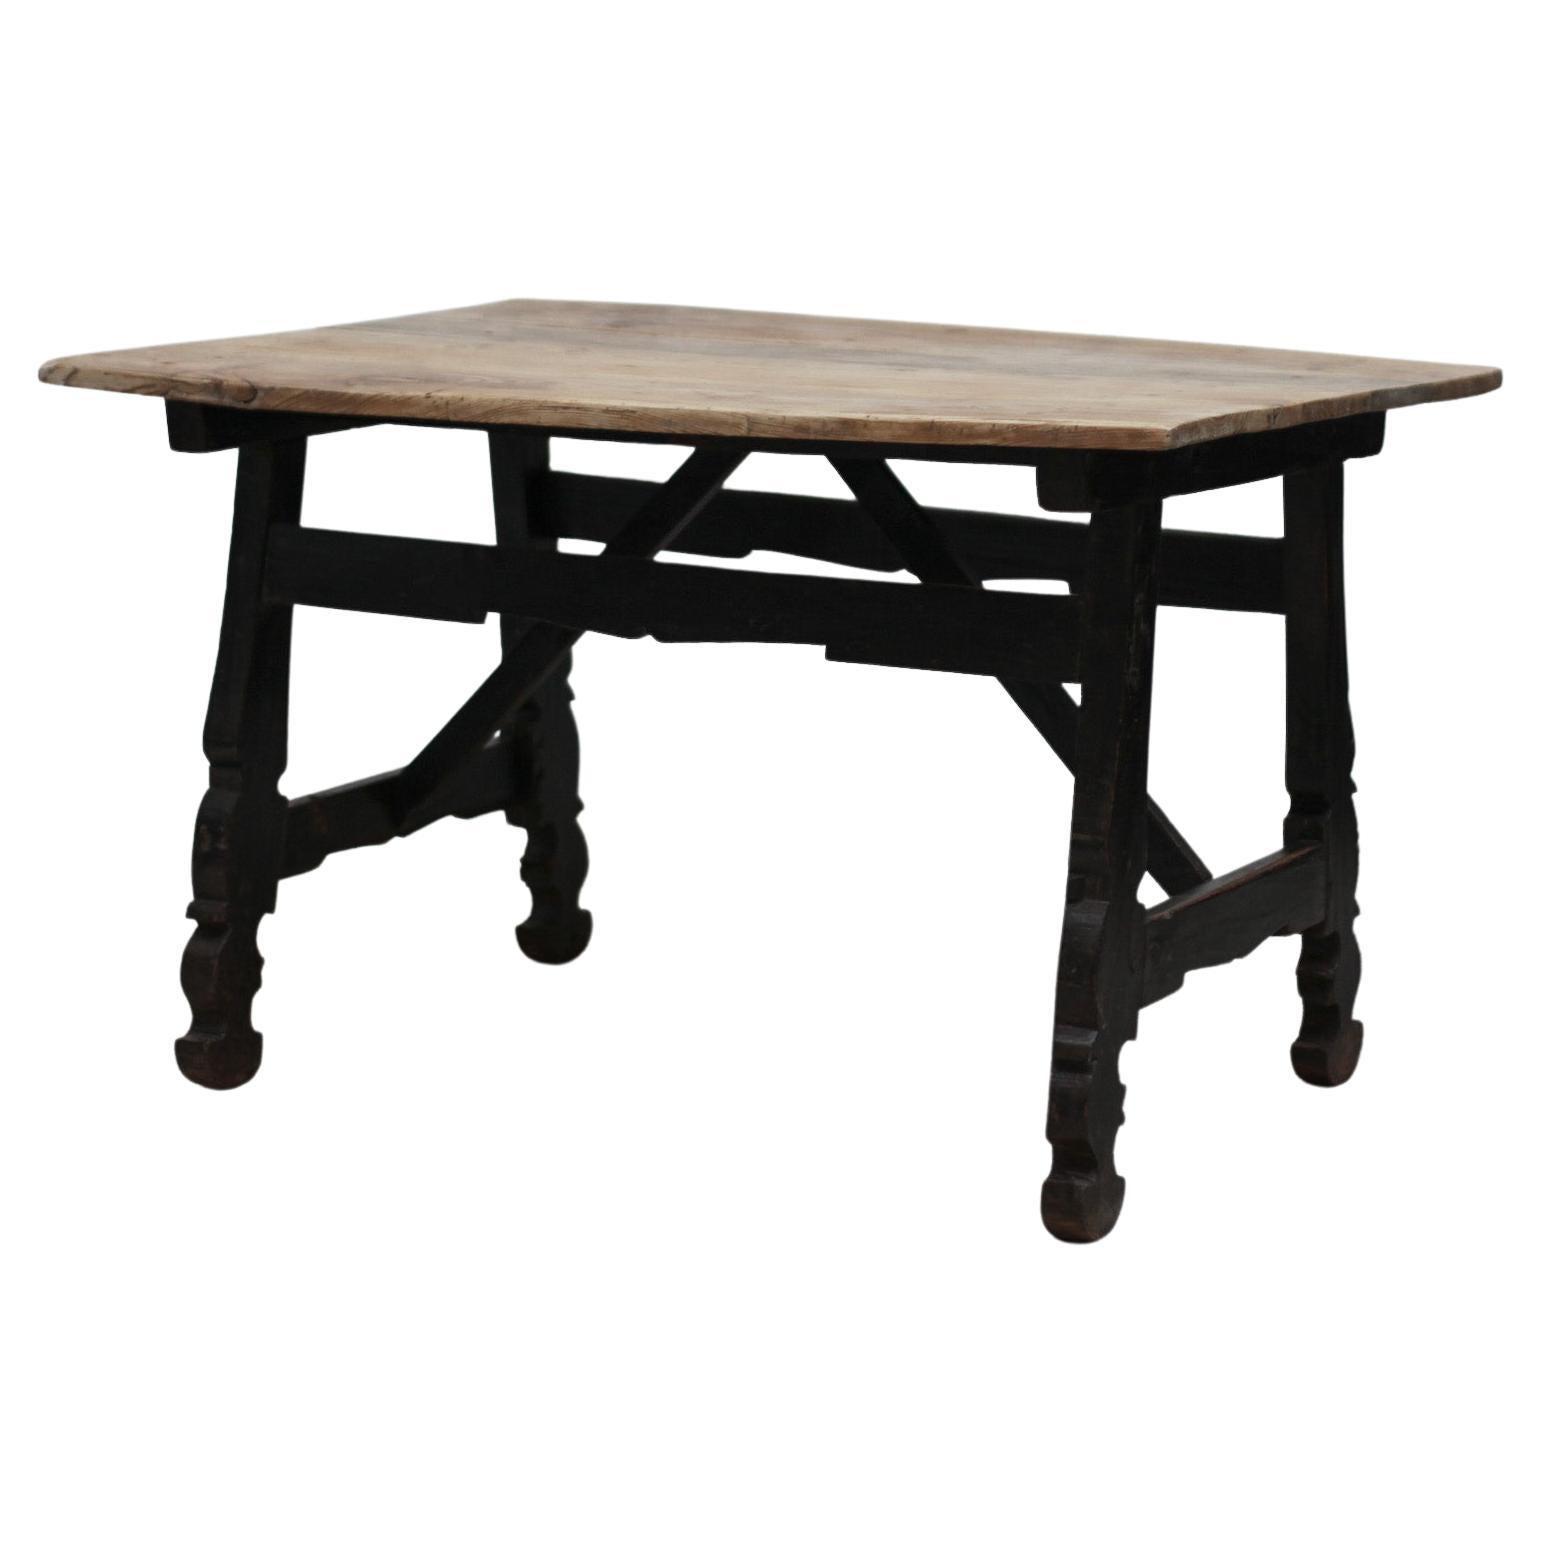  18th C. Vernacular Catalan Table For Sale